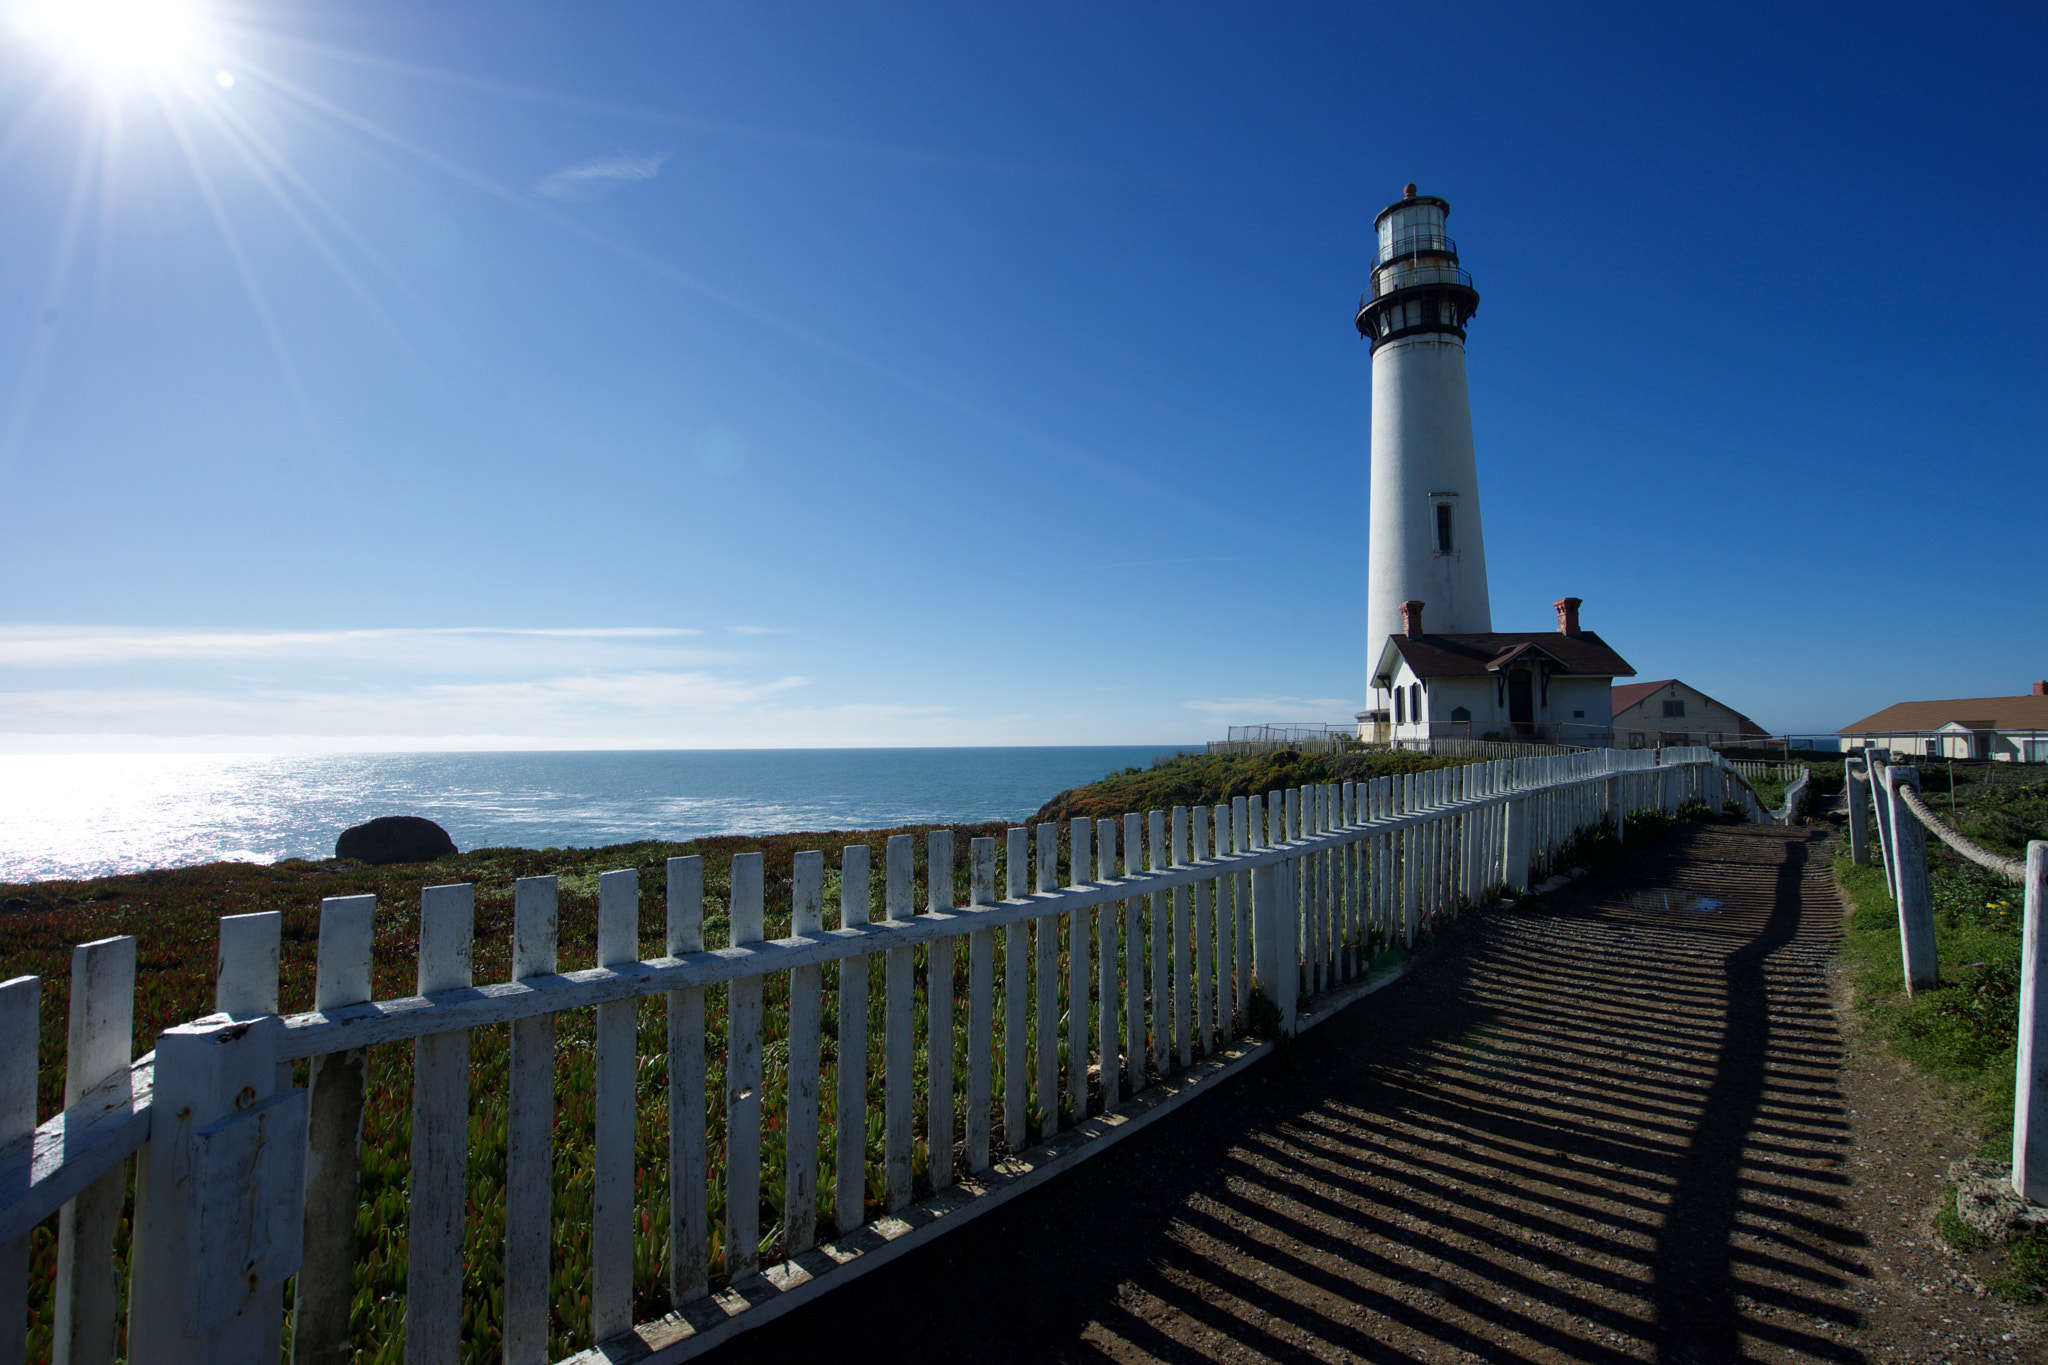 Sony a7 sample photo. Pigeon point lighthouse photography